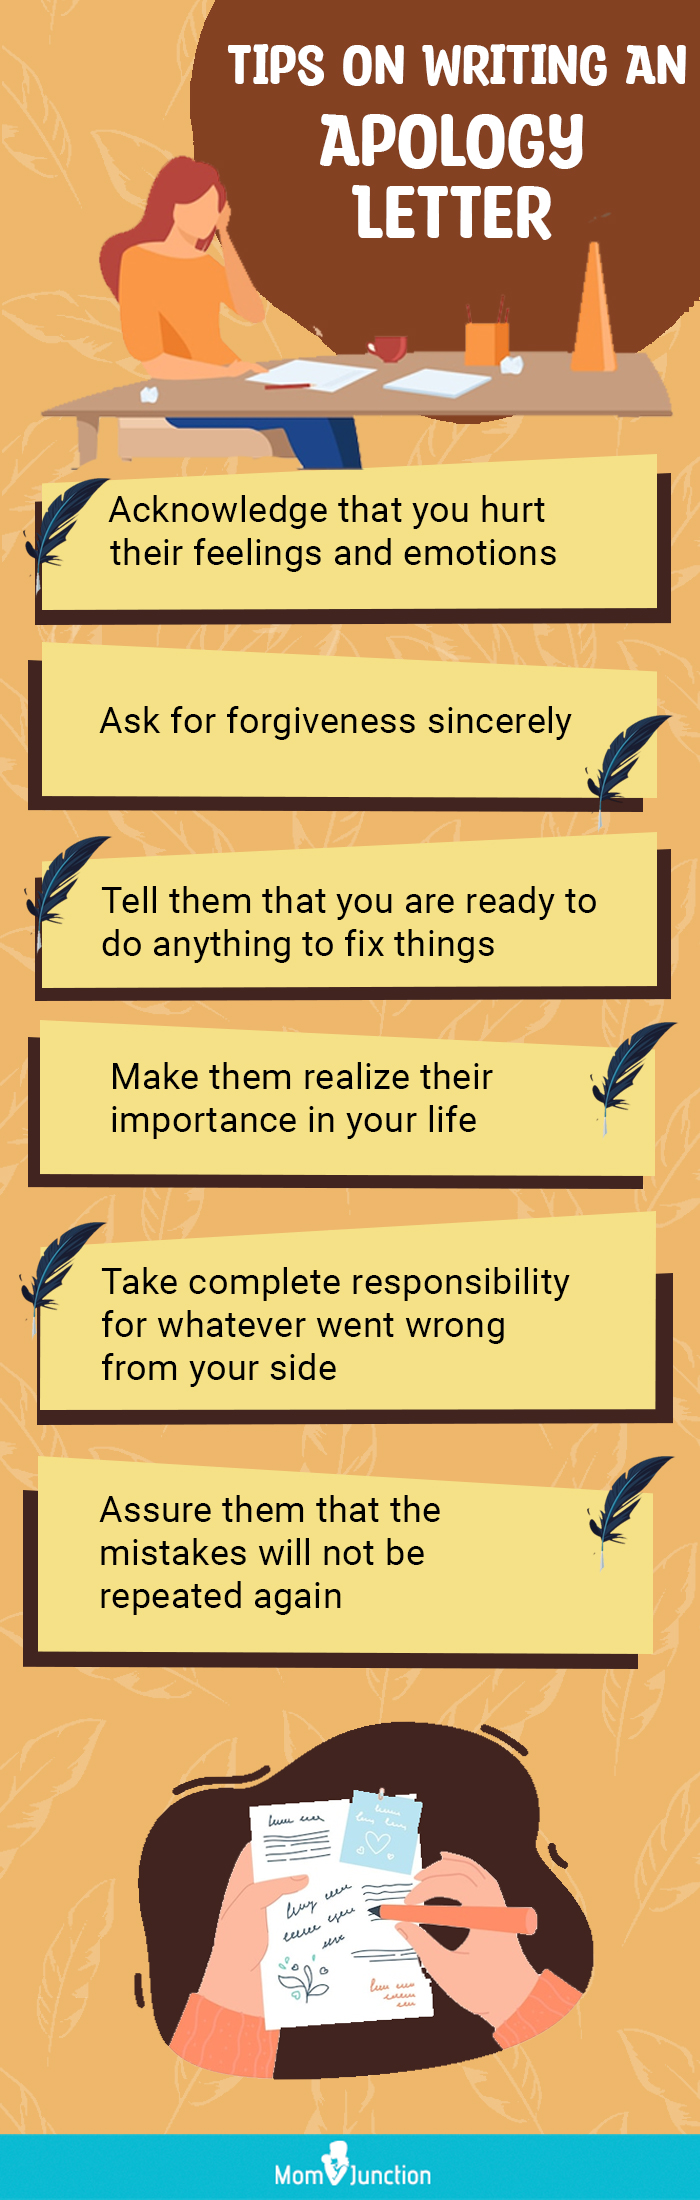 tips on writing an apology letter (infographic)